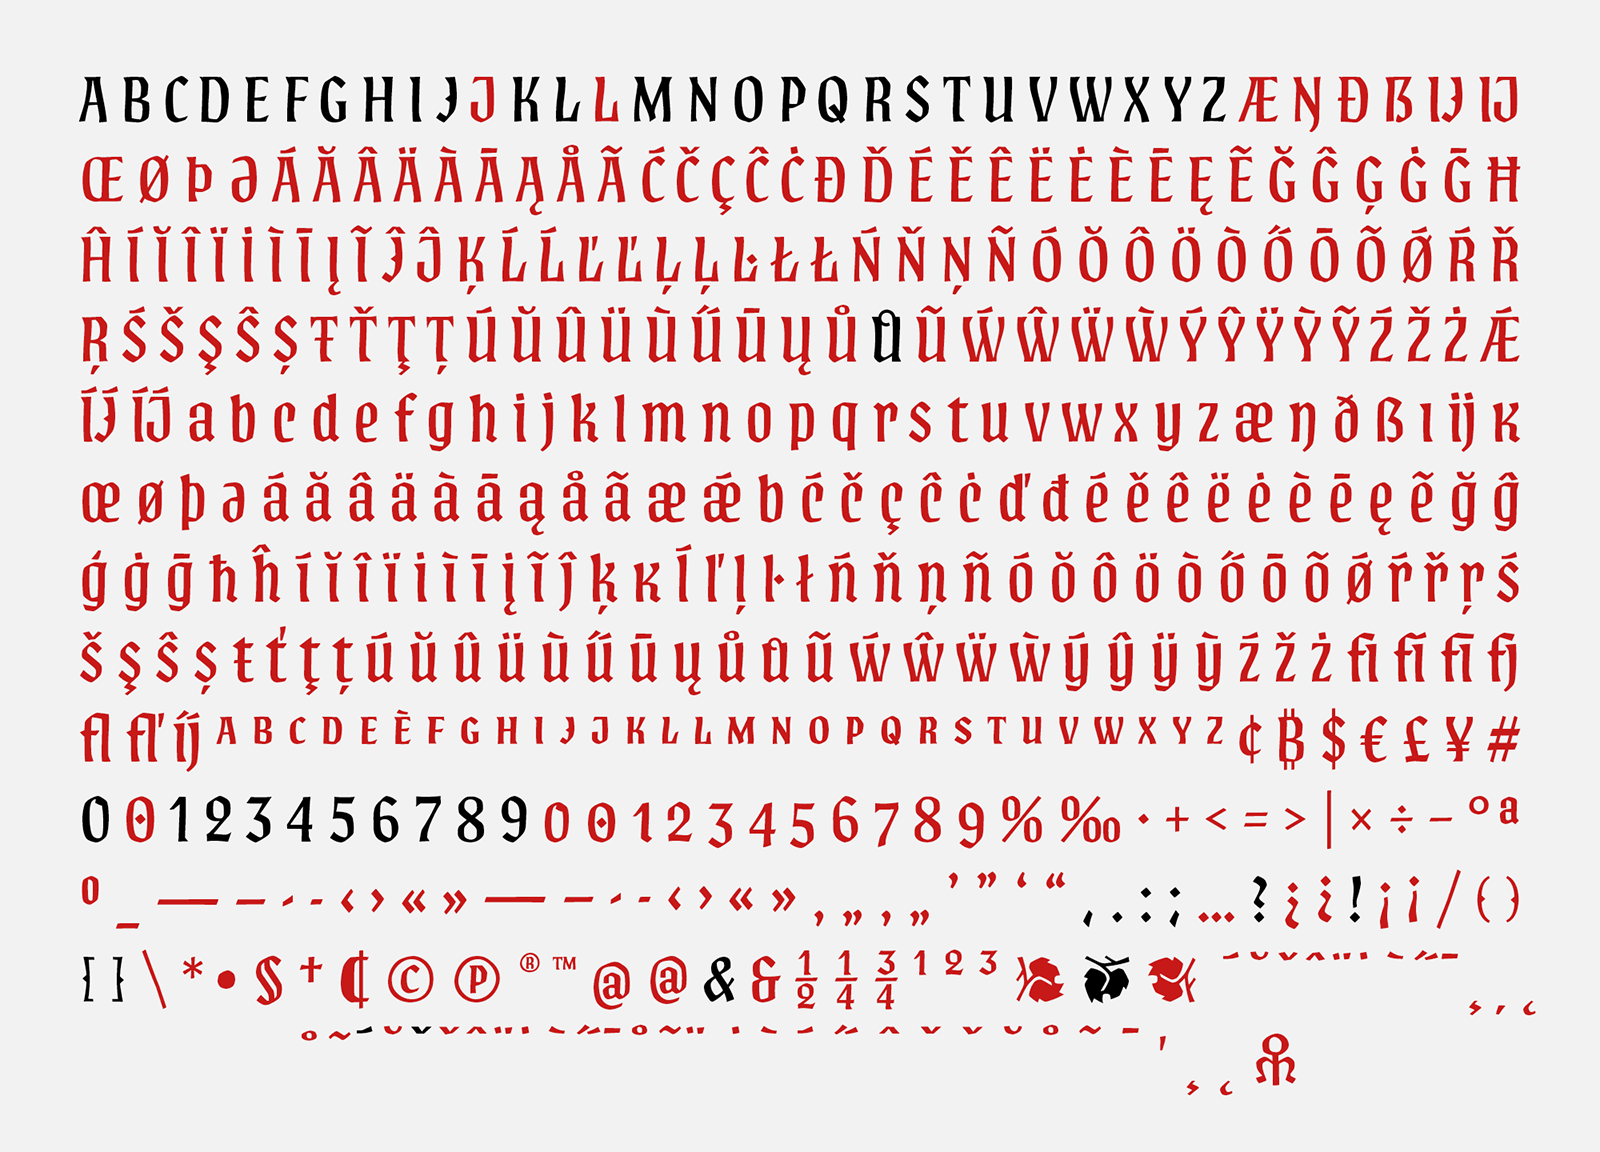 The BC Vajgar typeface’s complete character set. The ones marked in black are the original characters designed by Oldřich Menhart. The red characters are the ones that have been newly created.